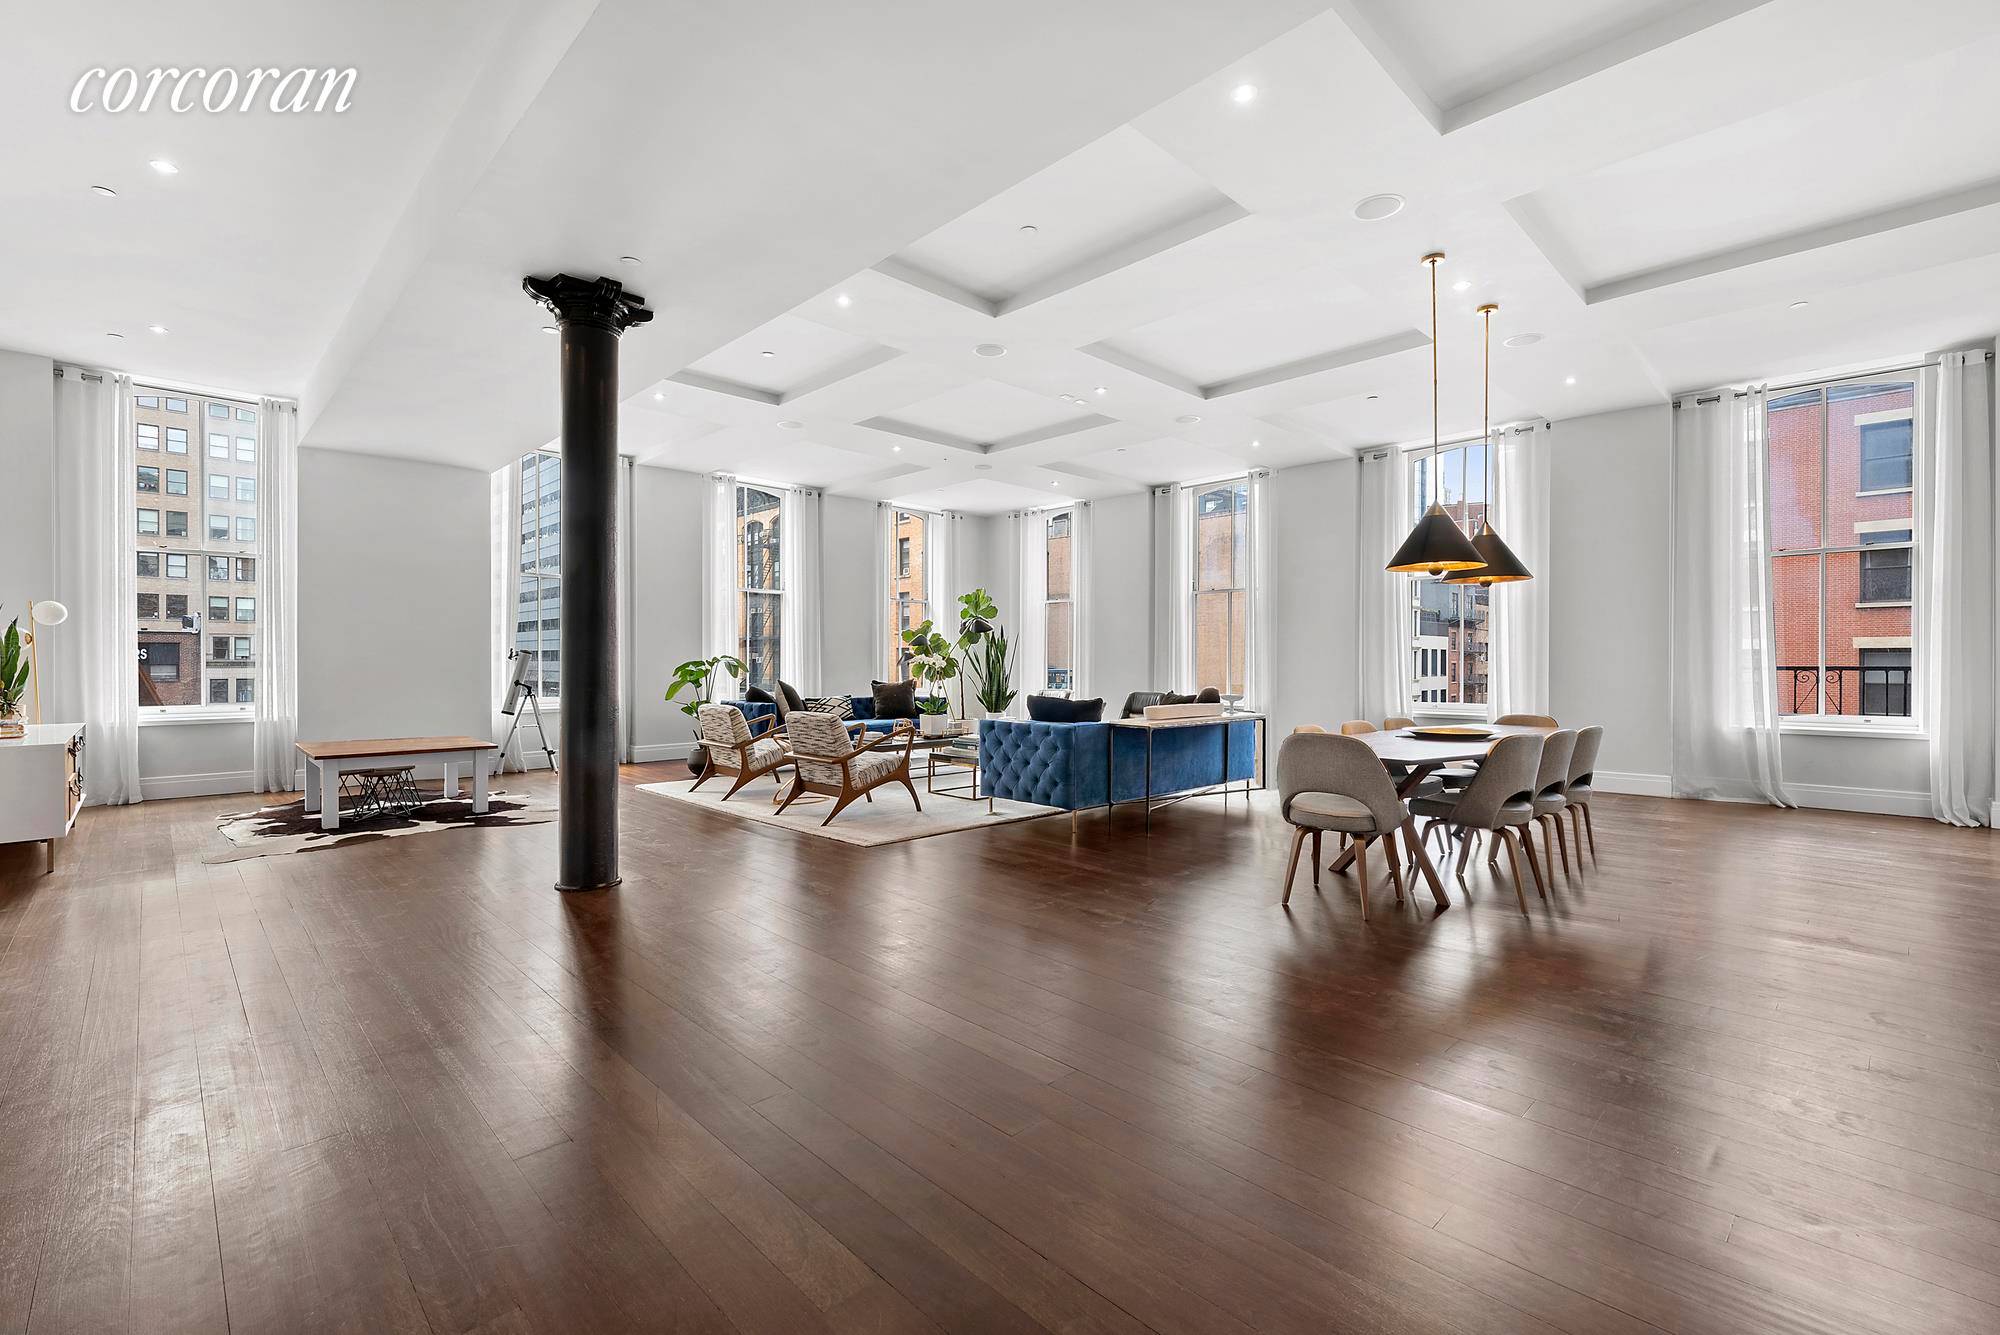 This stunning full floor loft conversion delivers the original details Tribeca homebuyers crave with the modern updates they demand.